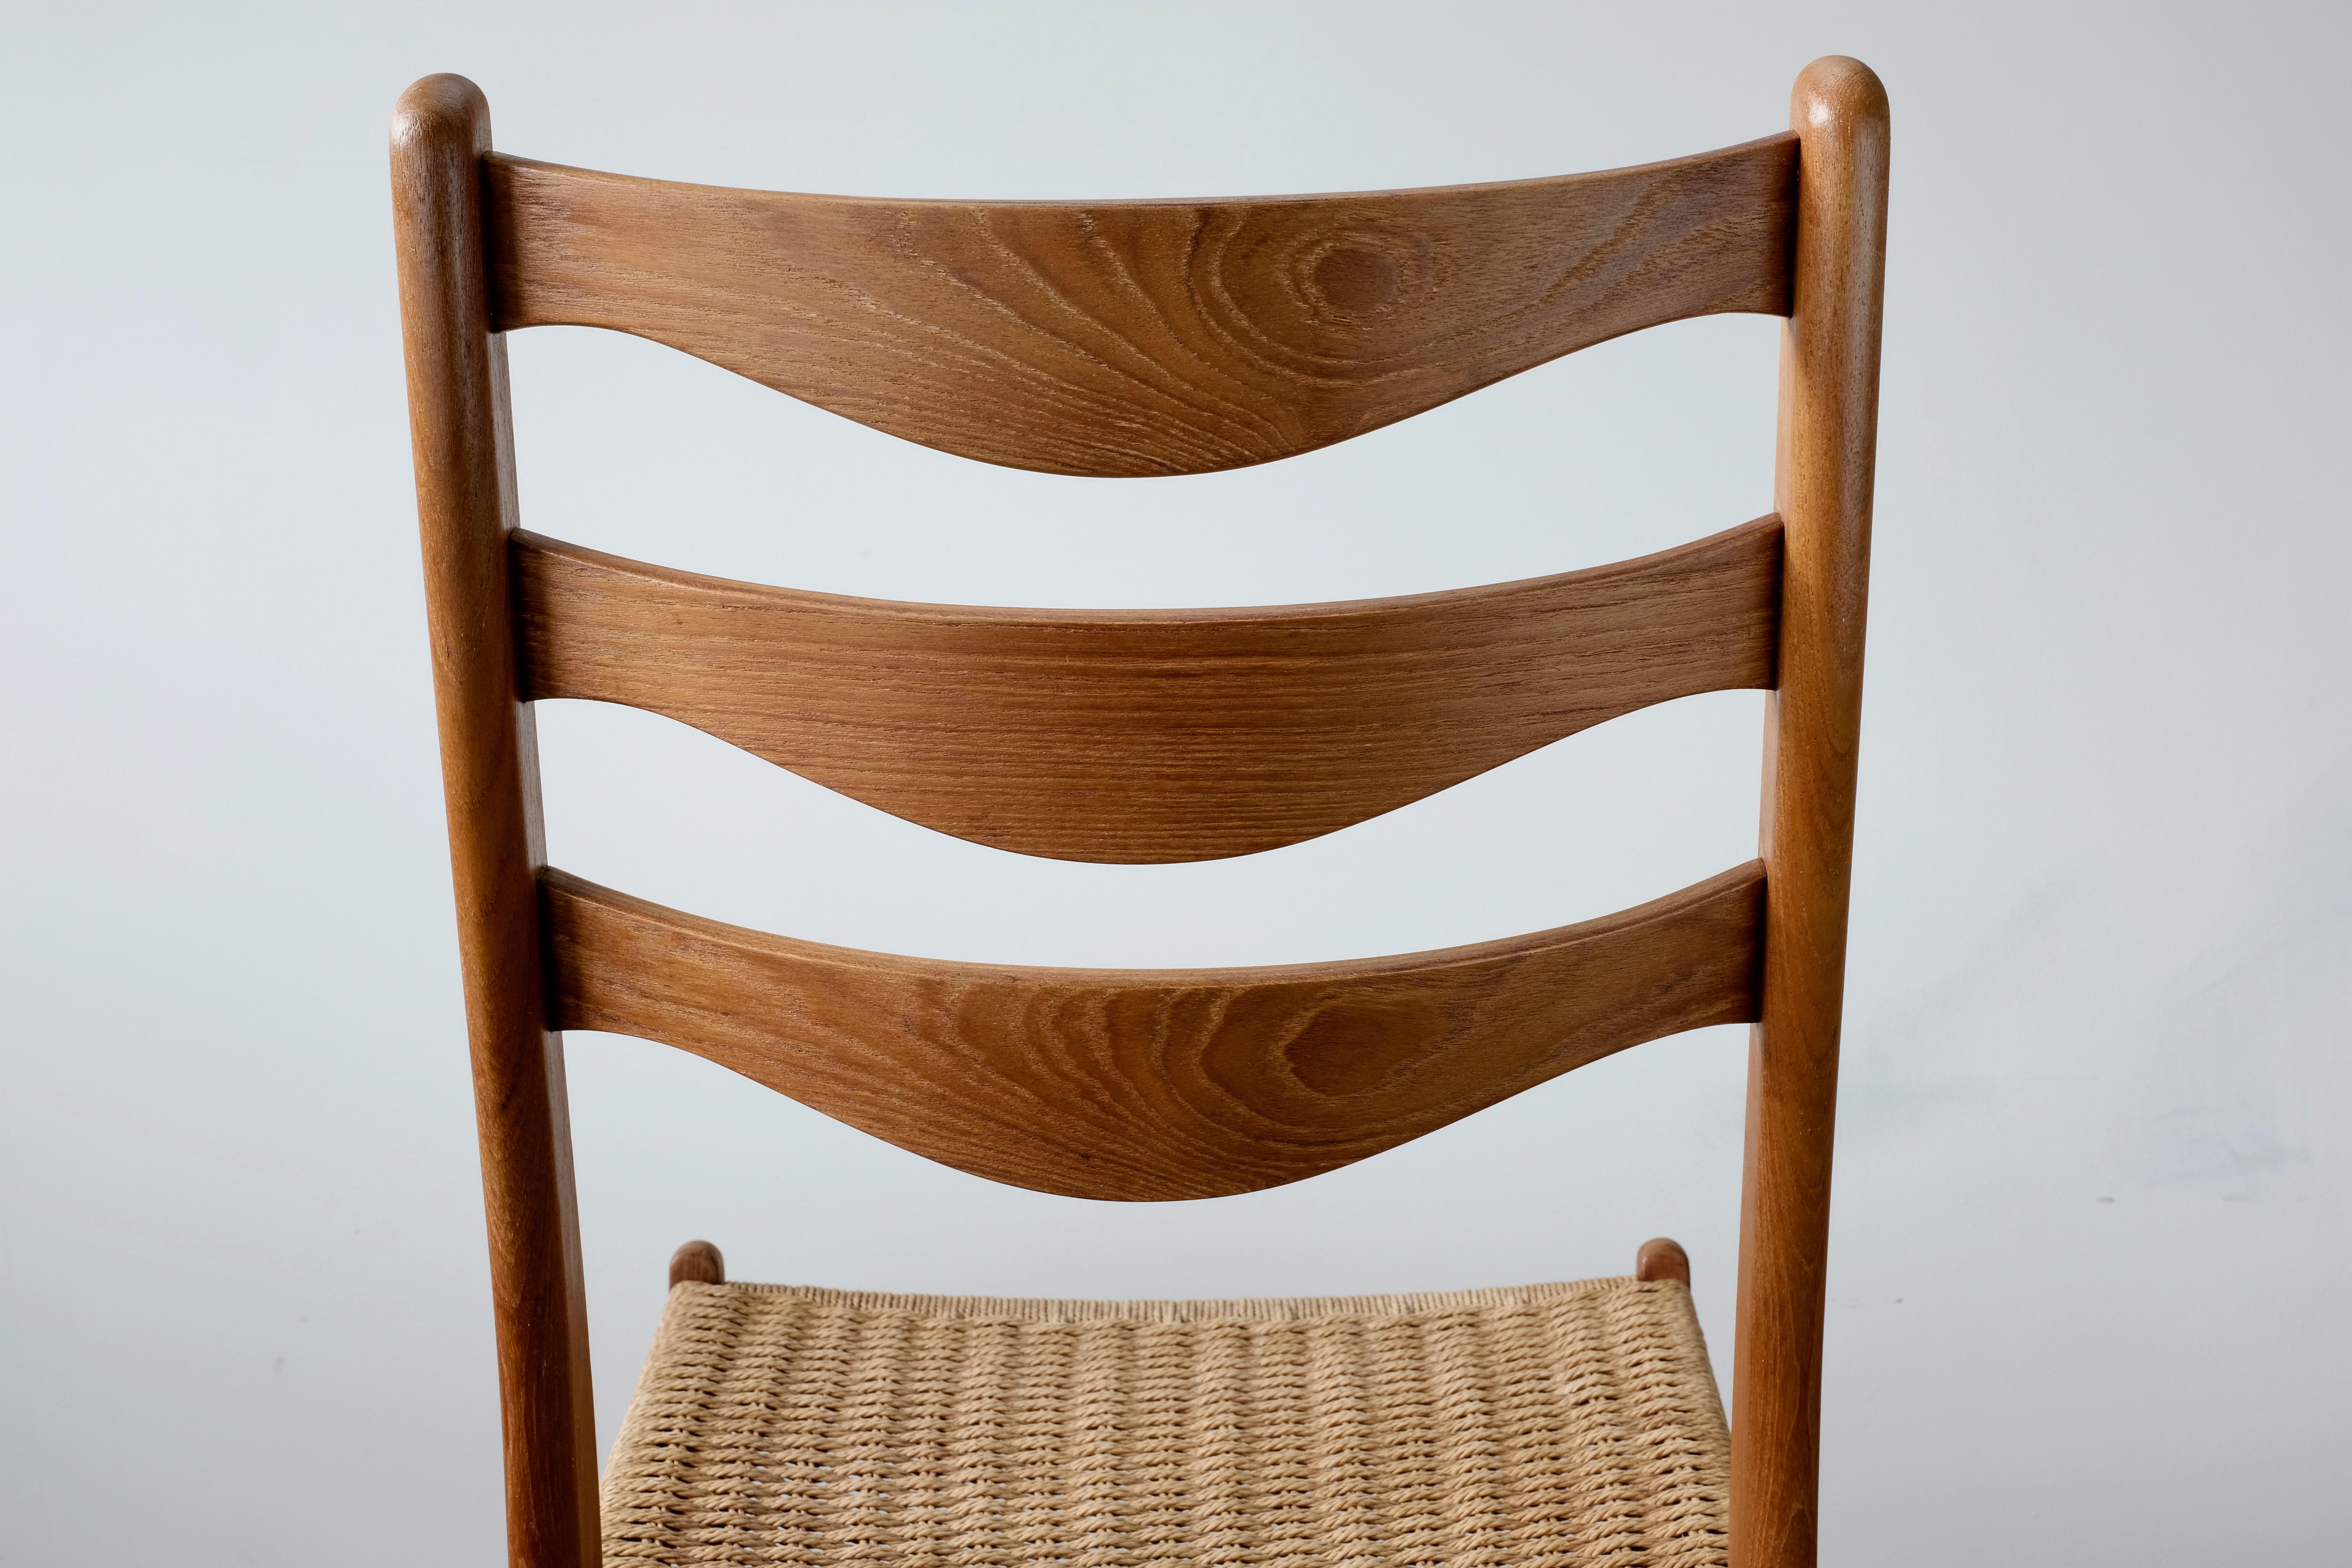 Mid-20th Century Set of 4 Teak Dining Chairs by Arne Wahl-Iversen for Glyngøre Stolefabrik For Sale